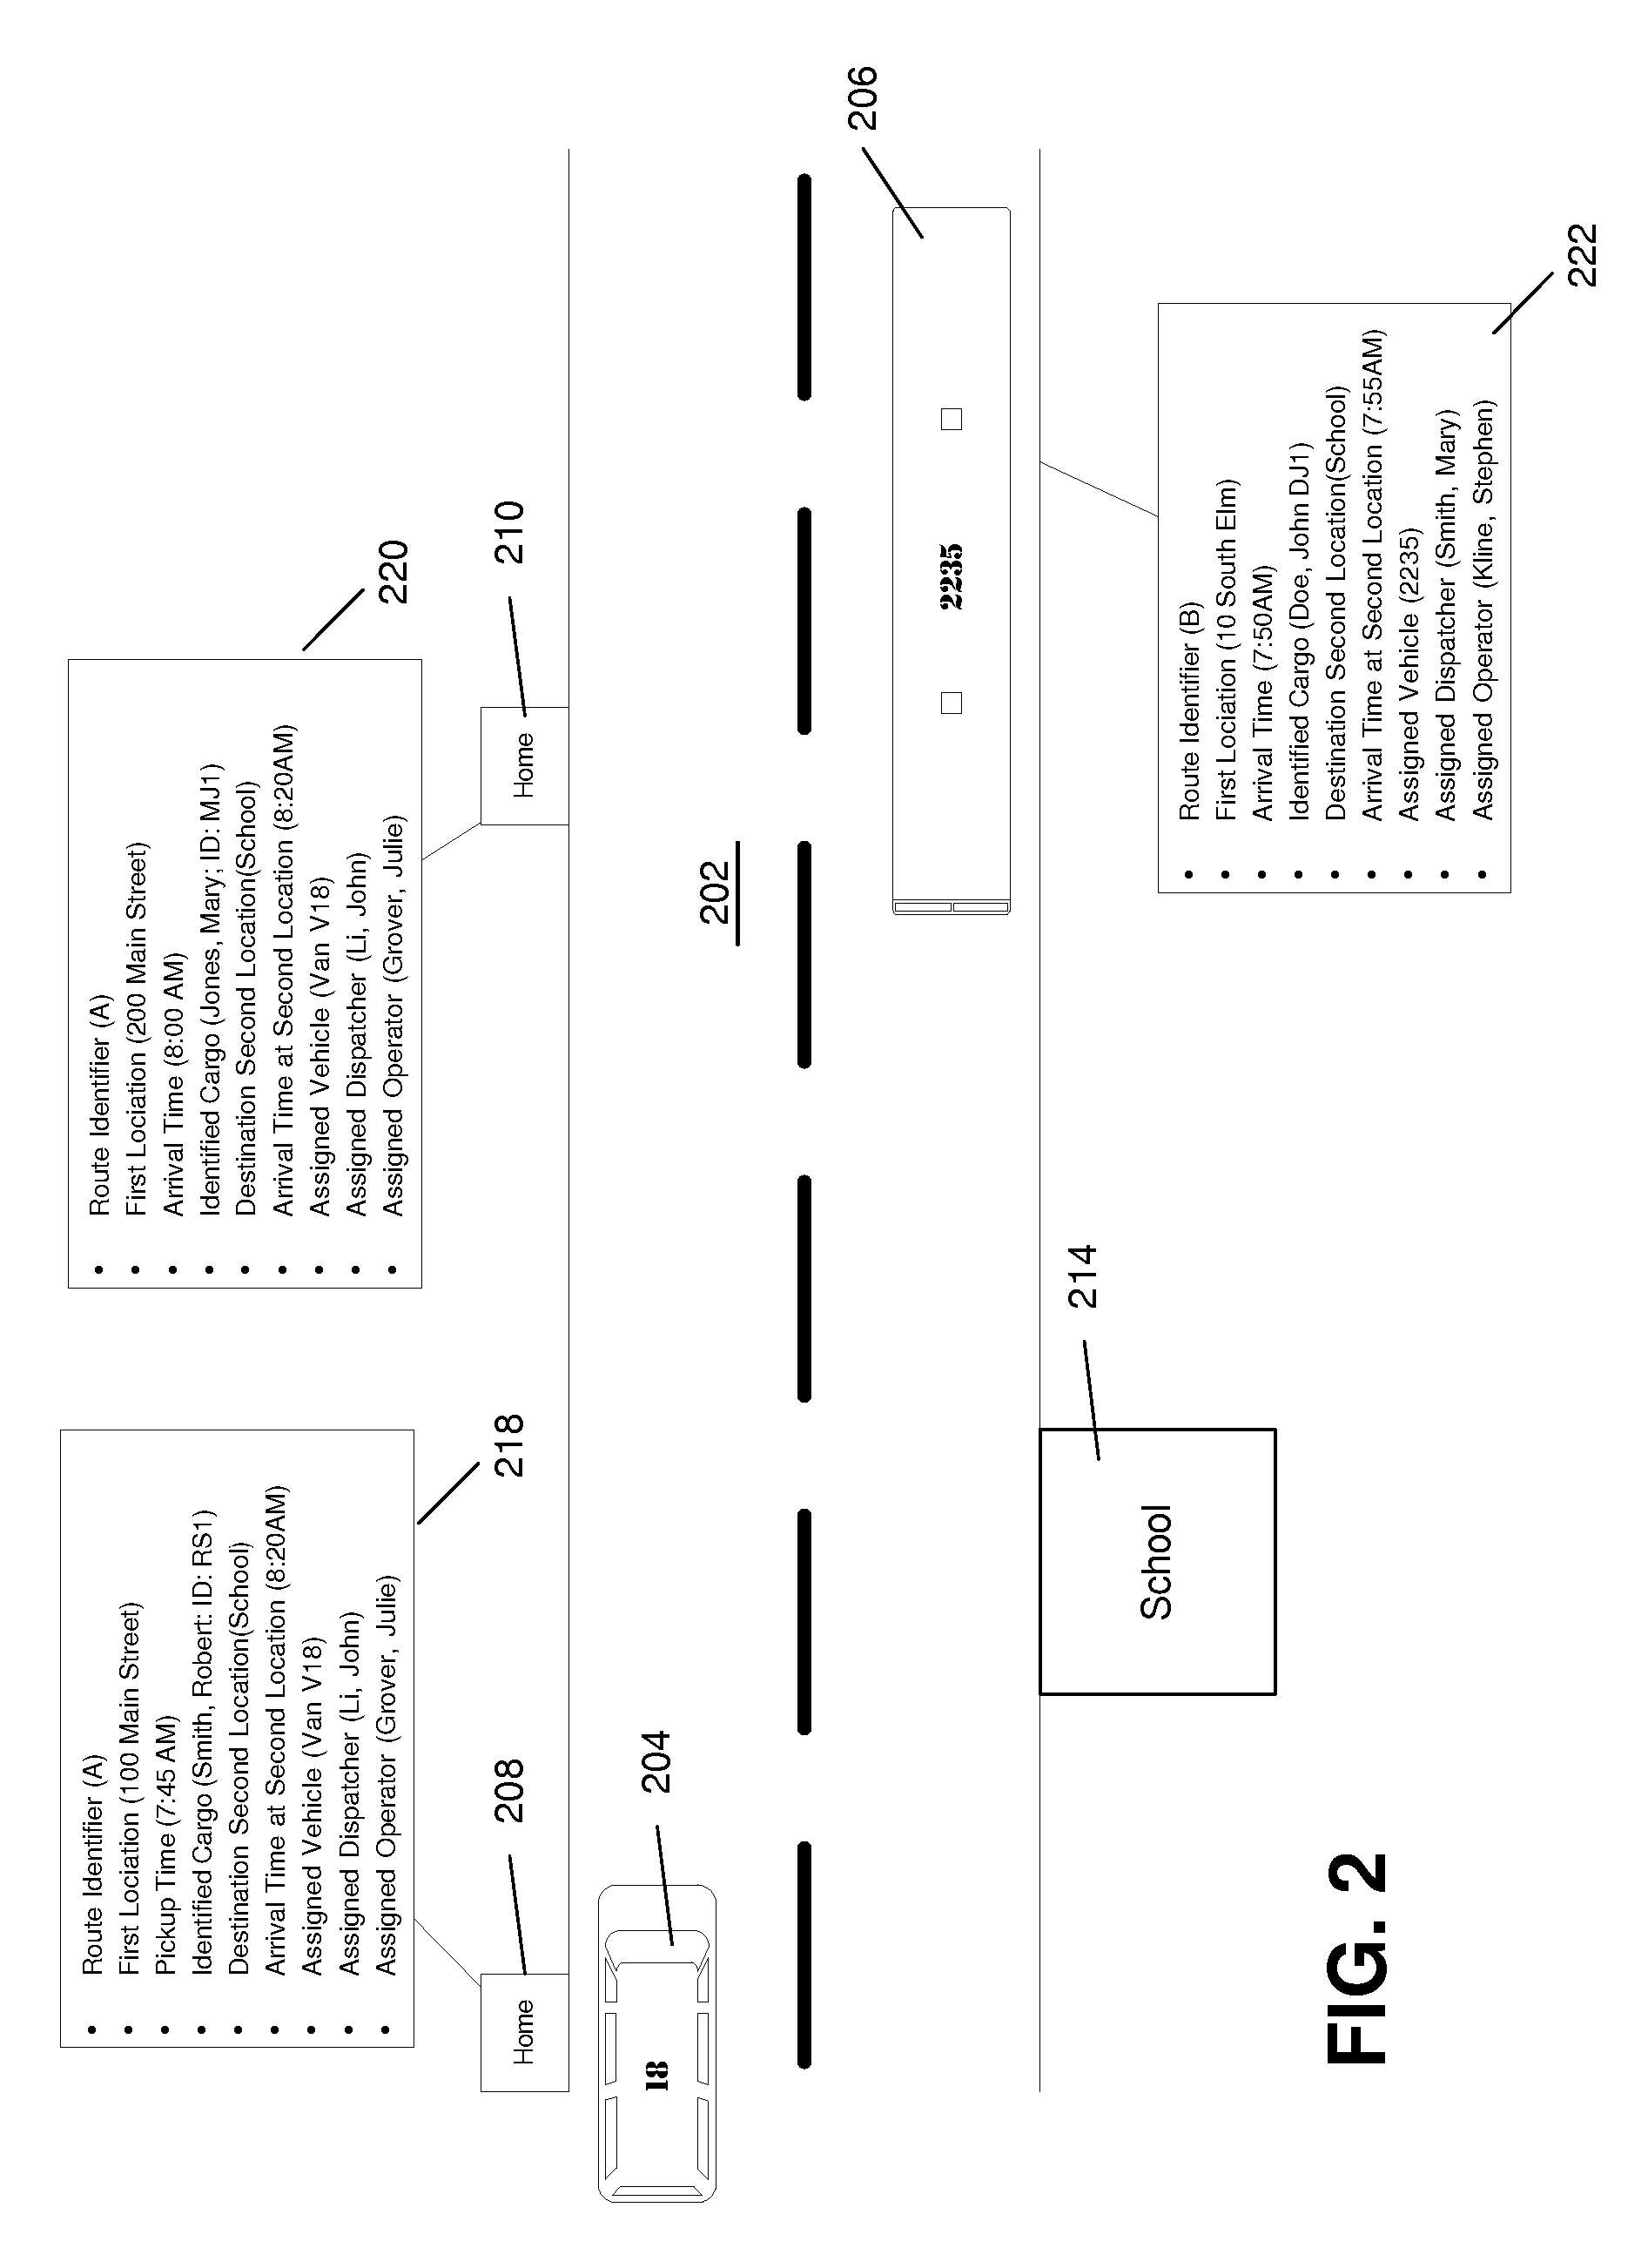 Dynamic Modification And Communication Of Routes For Transportation Vehicles